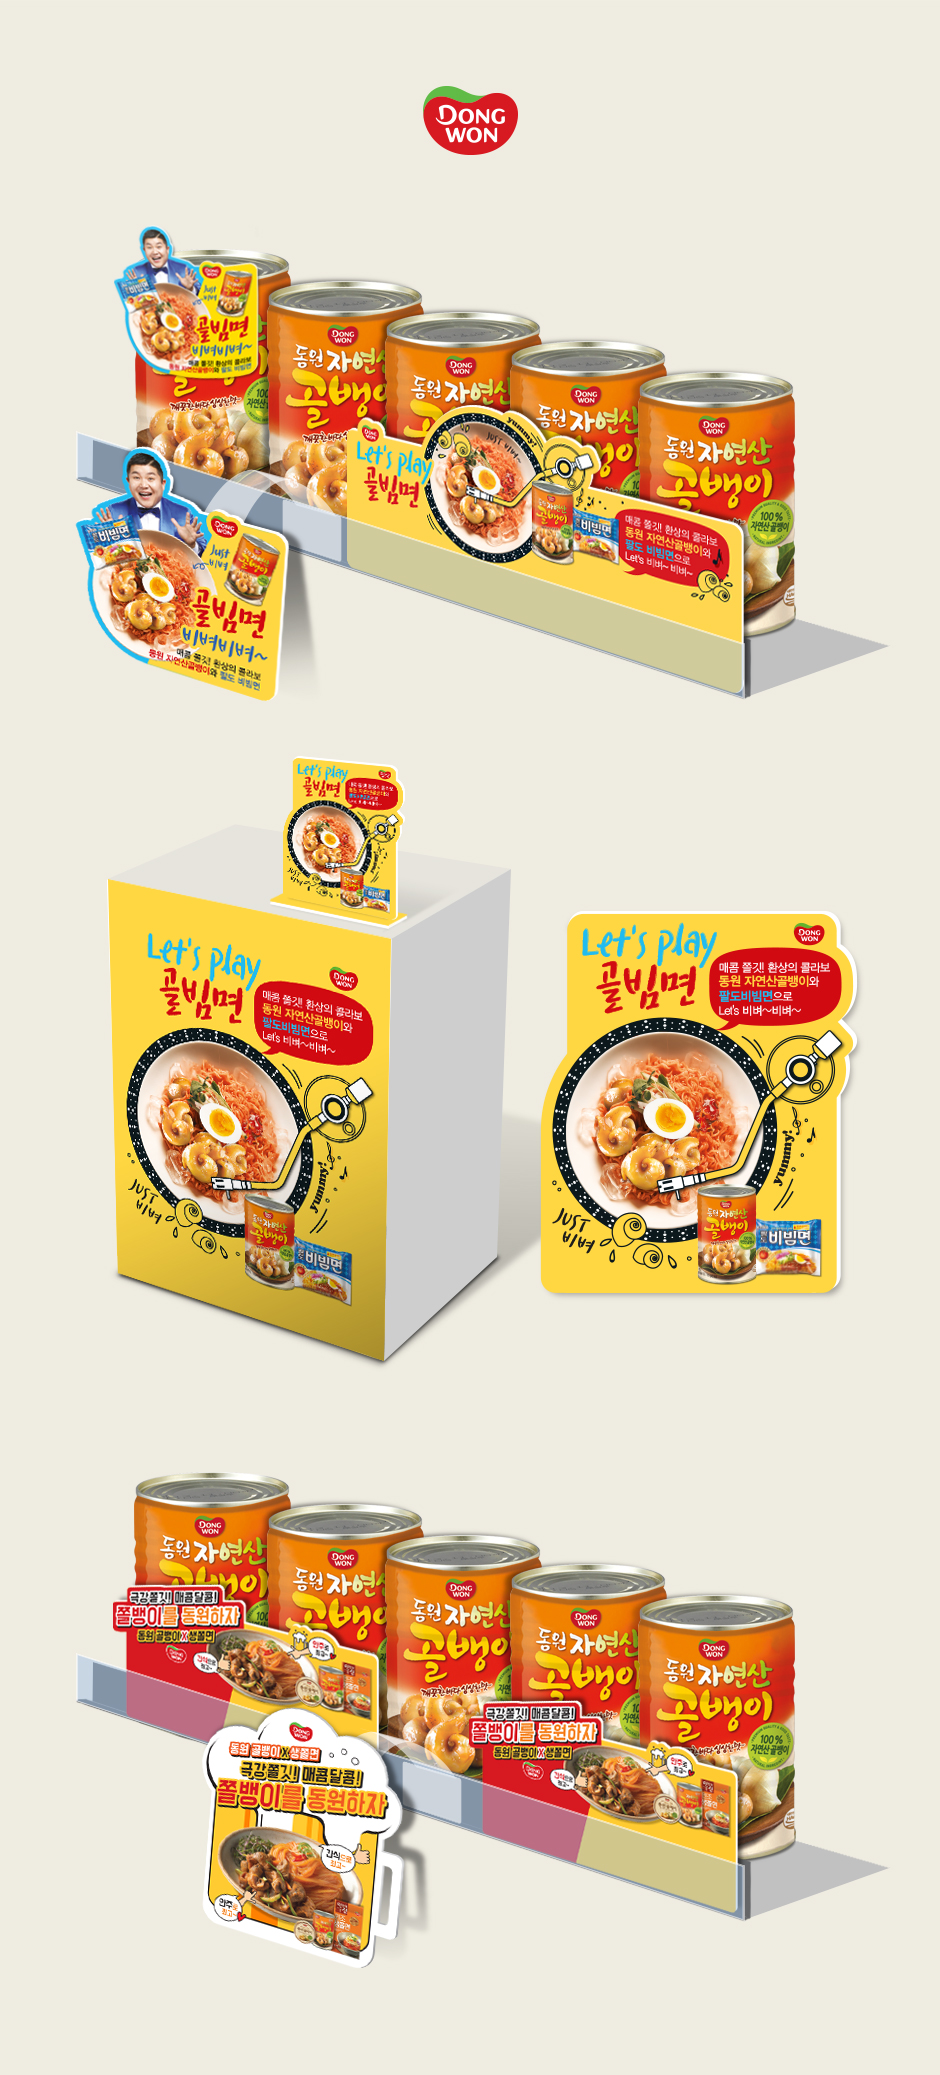 2018_Dongwon-FnB-Whelk Spicy-Noodles-P.O.P-design